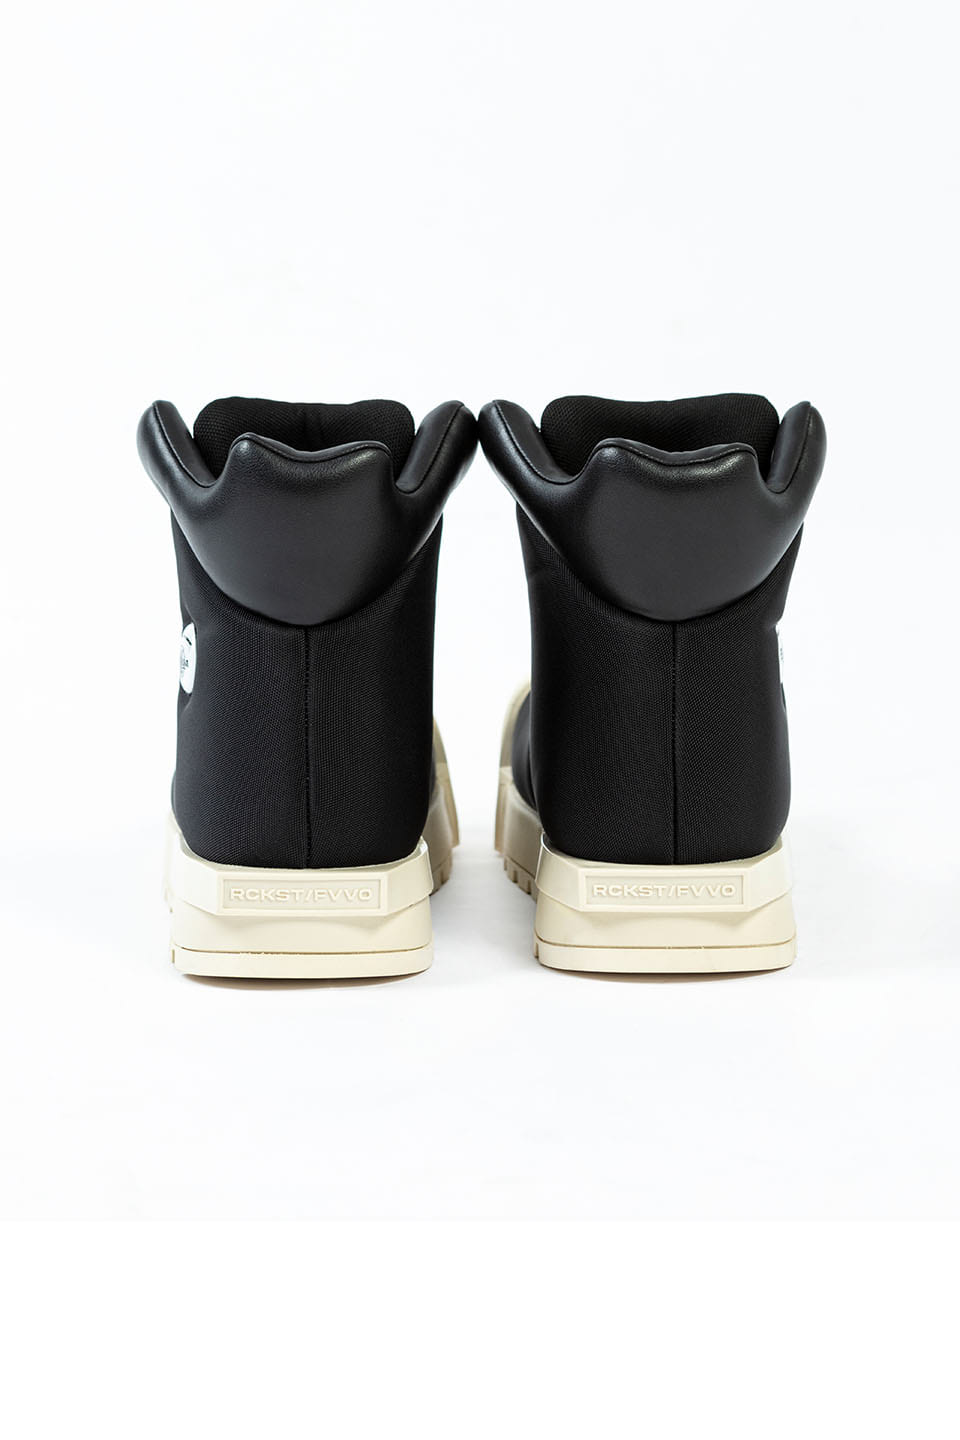 Thick Soled High Top Boots